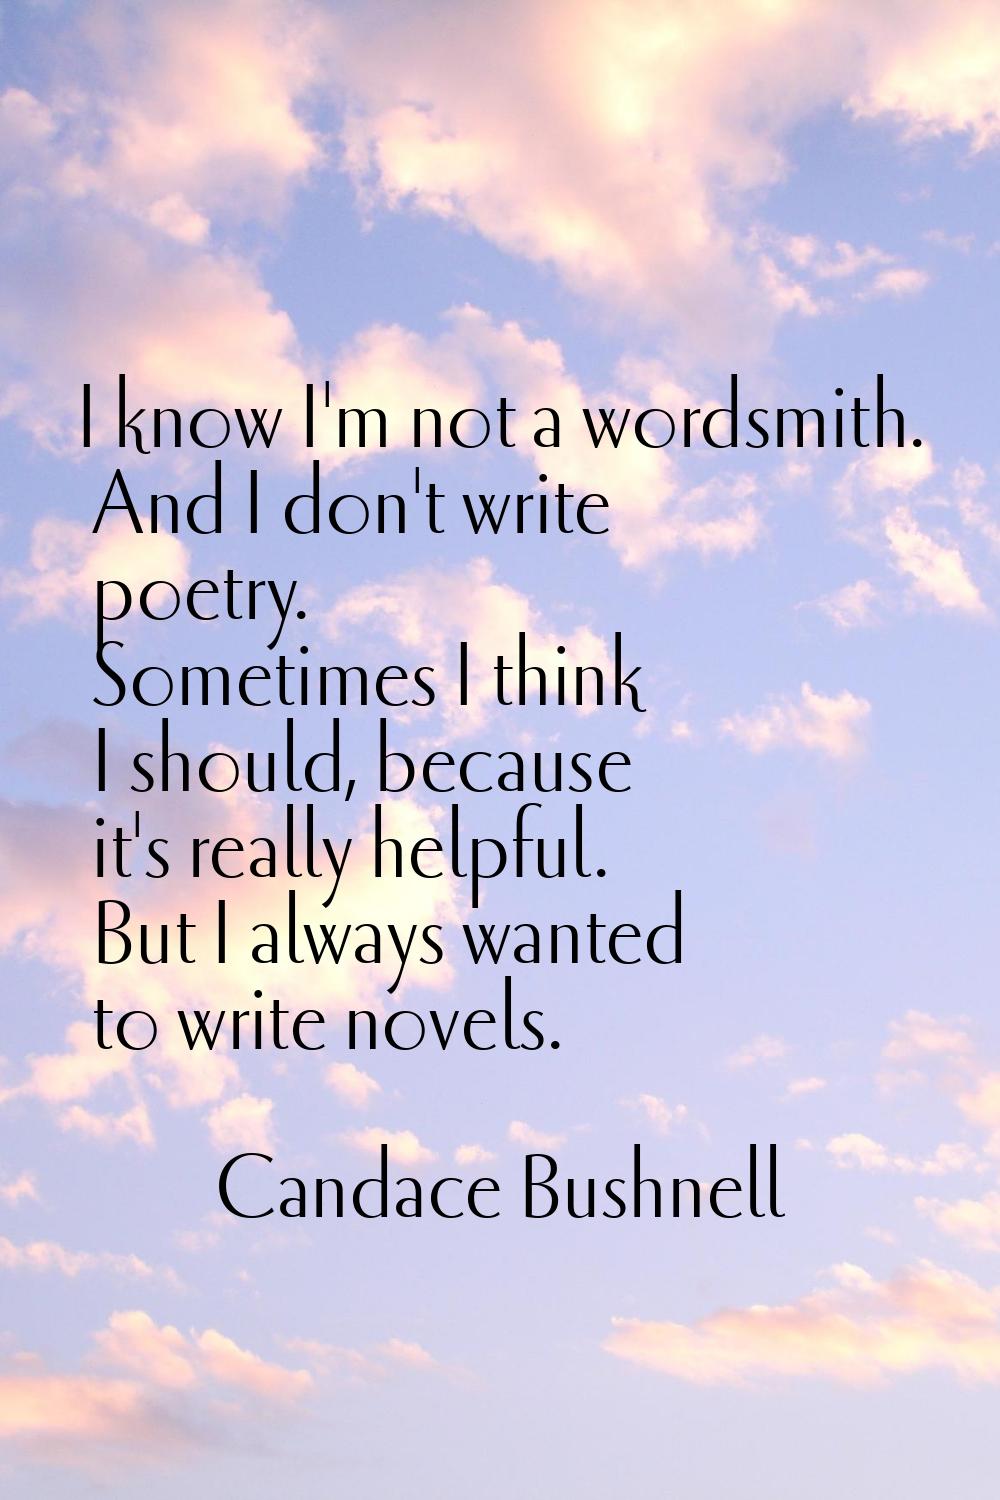 I know I'm not a wordsmith. And I don't write poetry. Sometimes I think I should, because it's real